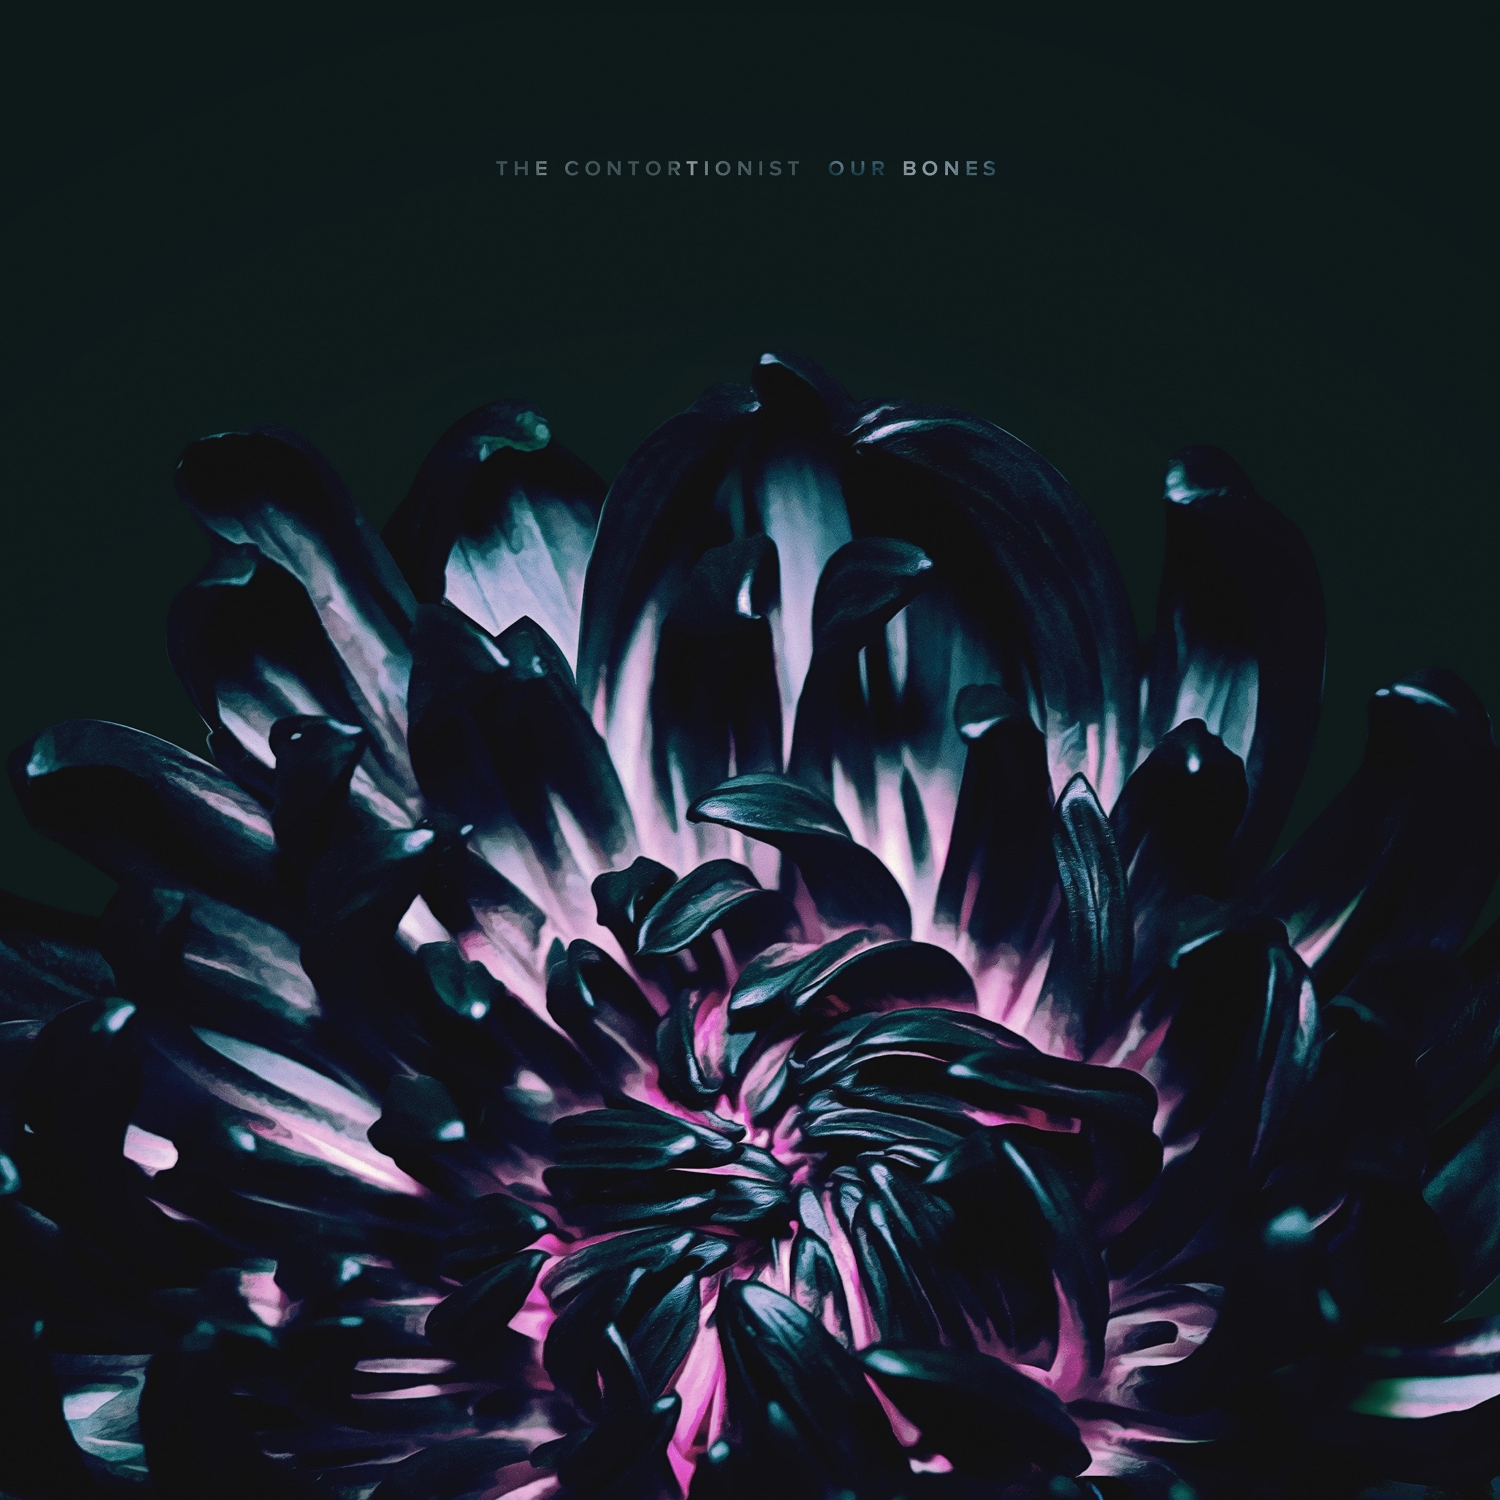 Review: The Contortionist - Our Bones